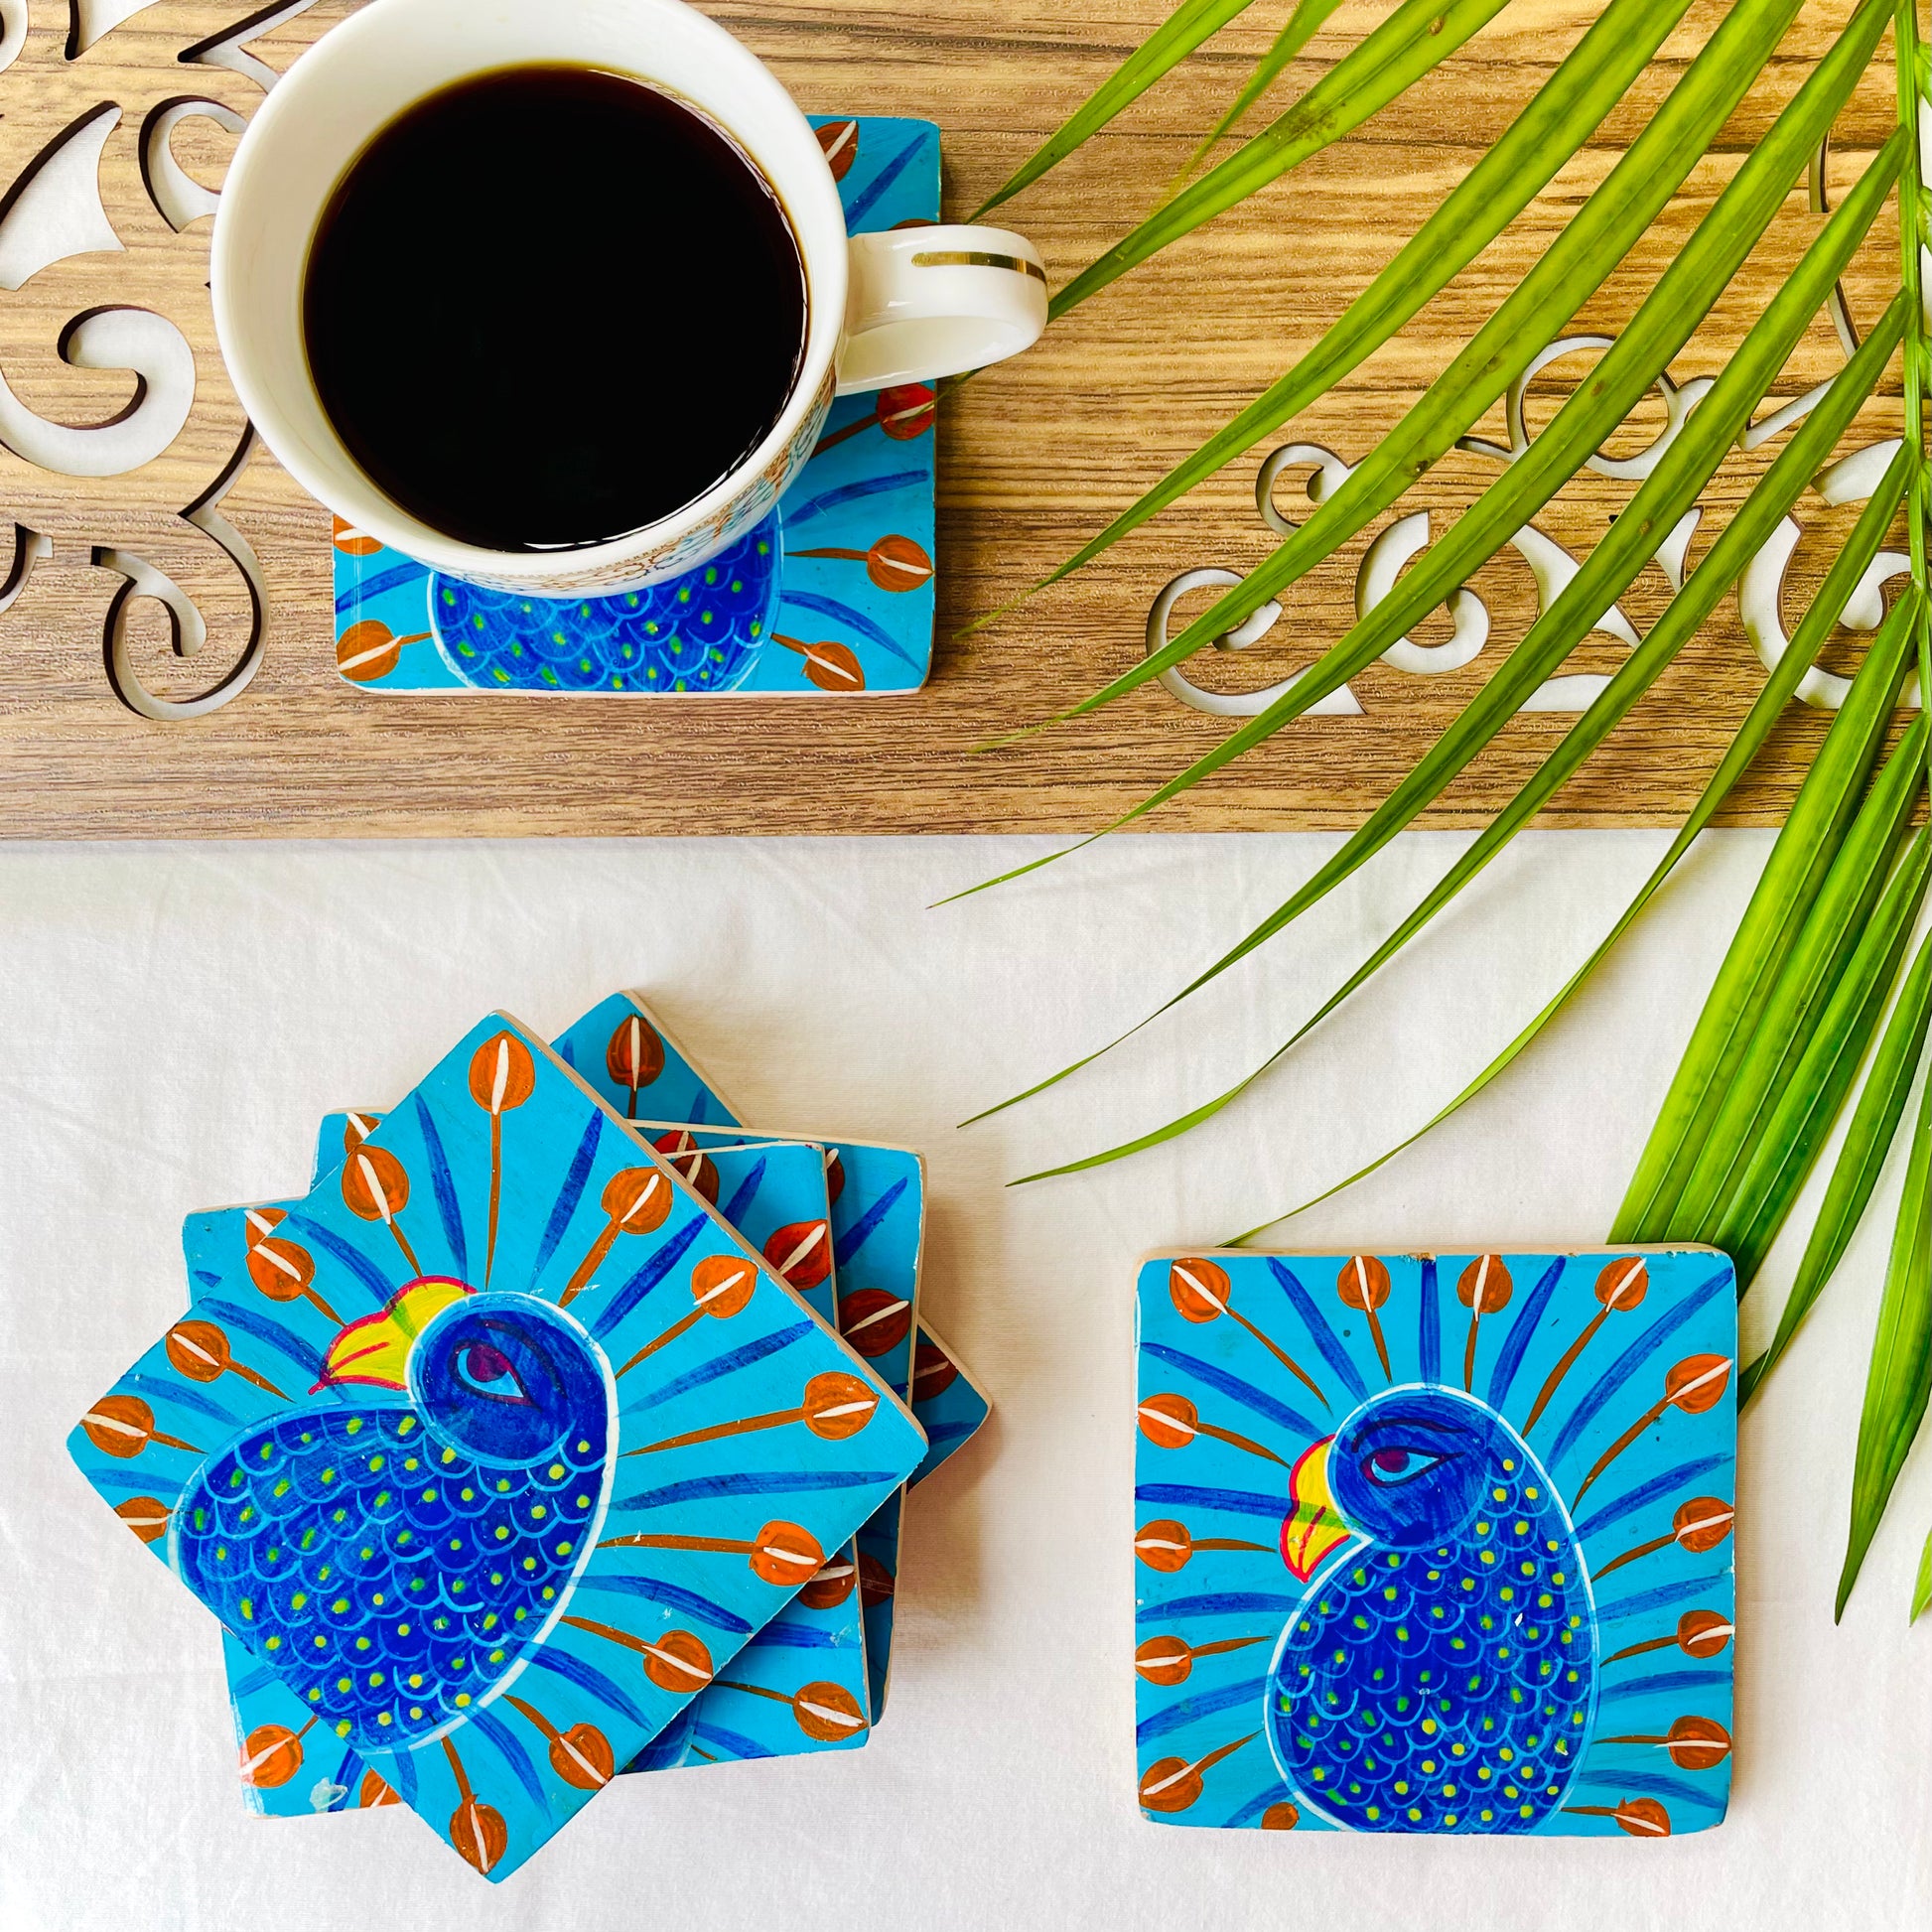 Five pure mango wood square wood coasters painted with peacocks having blue bodies, red feathers and yellow beaks are placed near a teacup on a wood coaster filled with black tea with leaves in the background